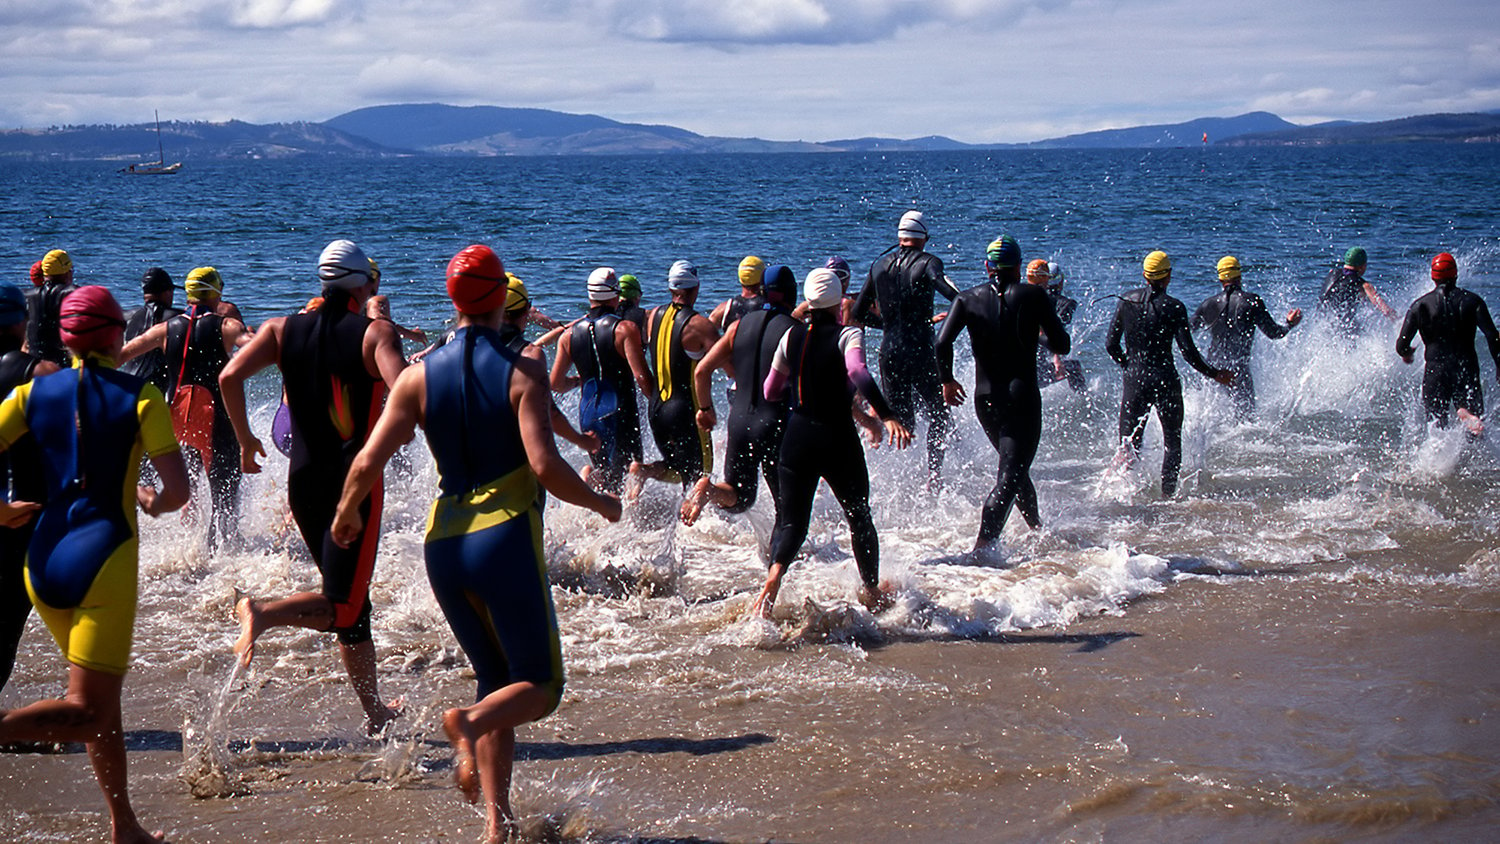 triathlon challenge crowded busy swim water competition race